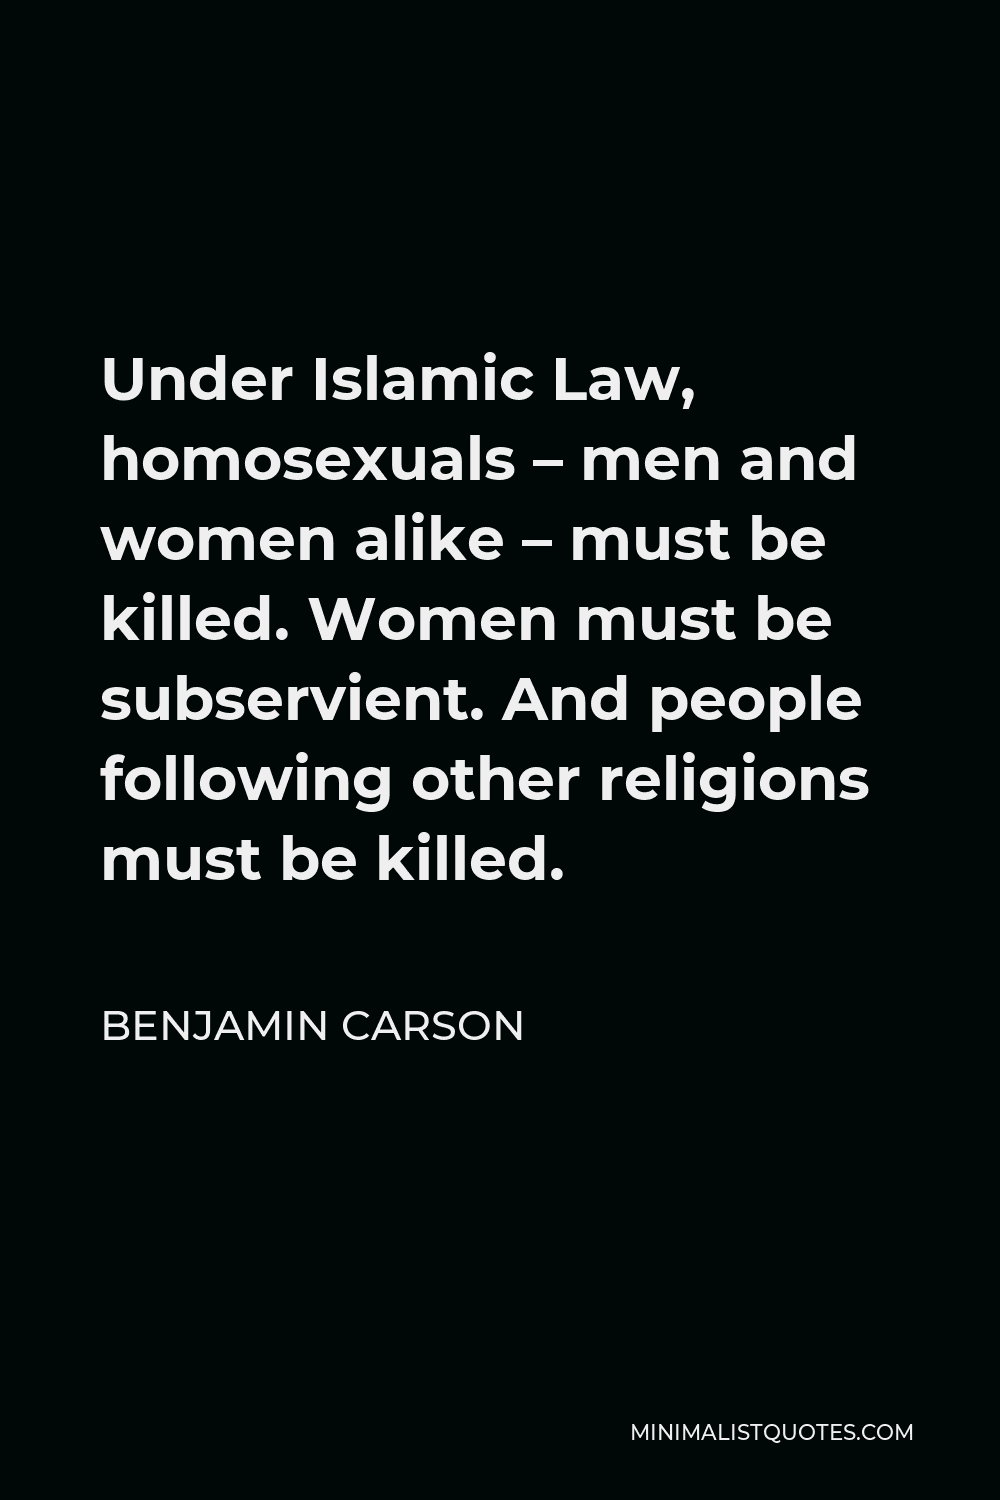 Benjamin Carson Quote - Under Islamic Law, homosexuals – men and women alike – must be killed. Women must be subservient. And people following other religions must be killed.